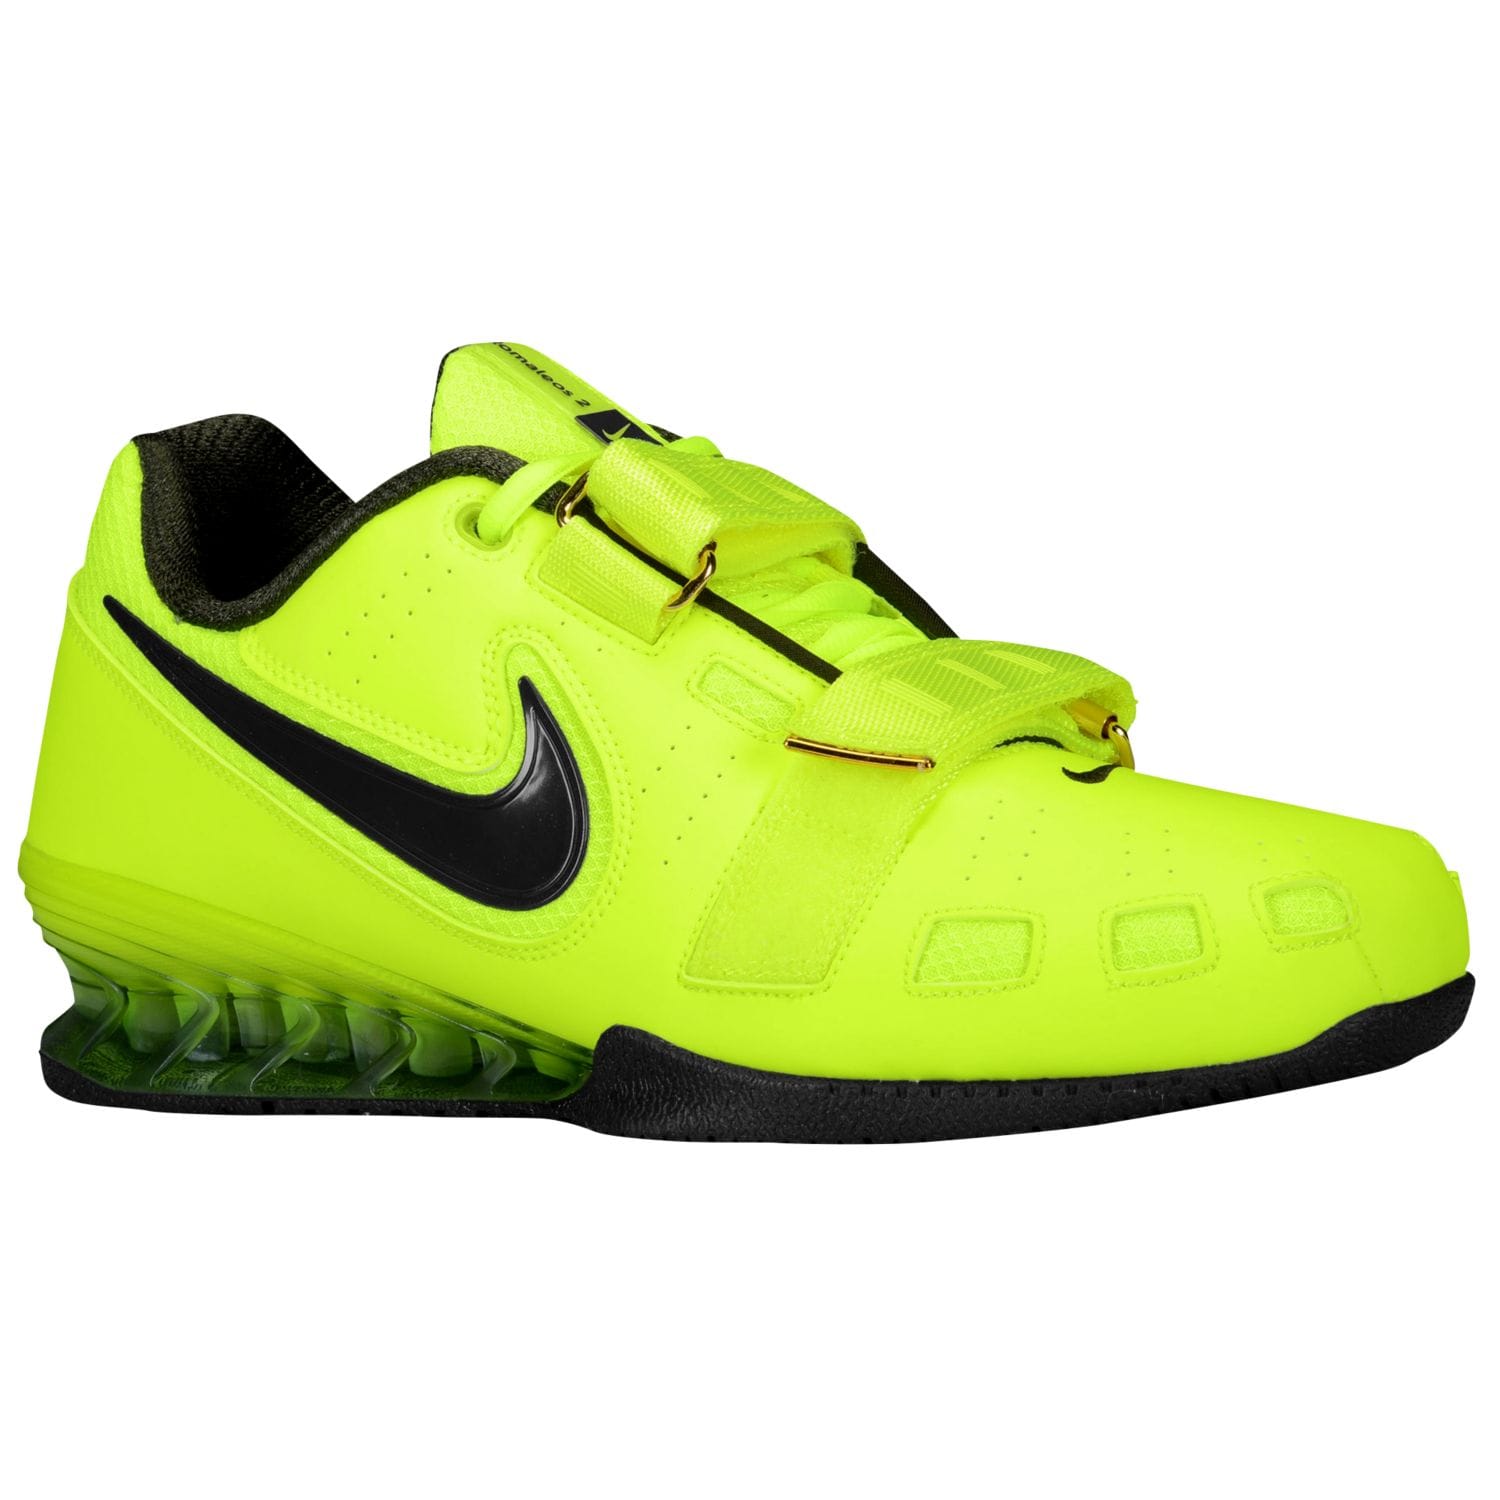 NIKE ROMALEOS 2 WEIGHTLIFTING SHOES | CHSSPORTS